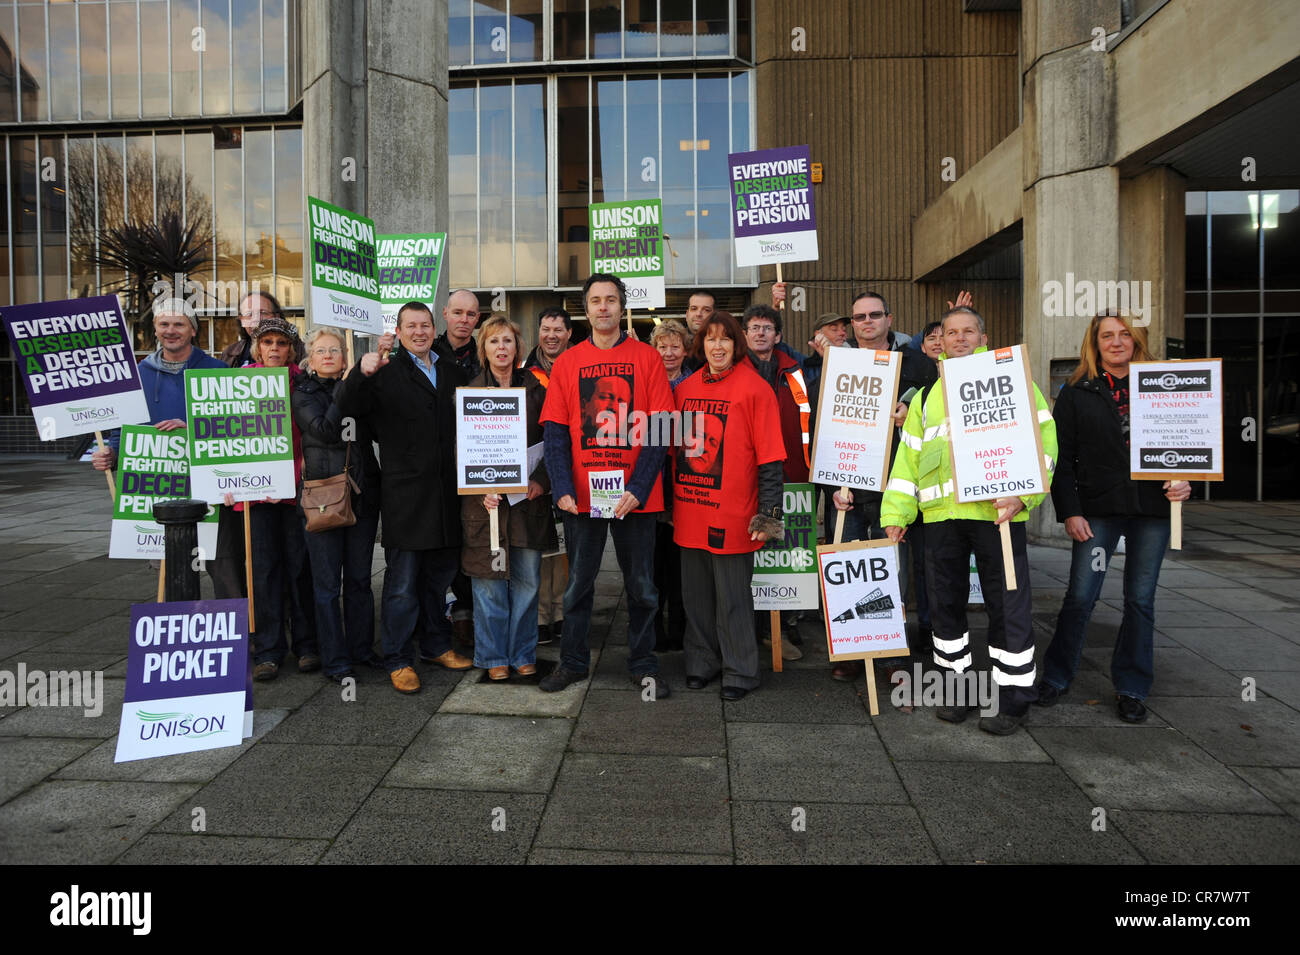 Public sector workers taking part in a one day strike to defend their pension rights picket outside Hove Town Hall Stock Photo